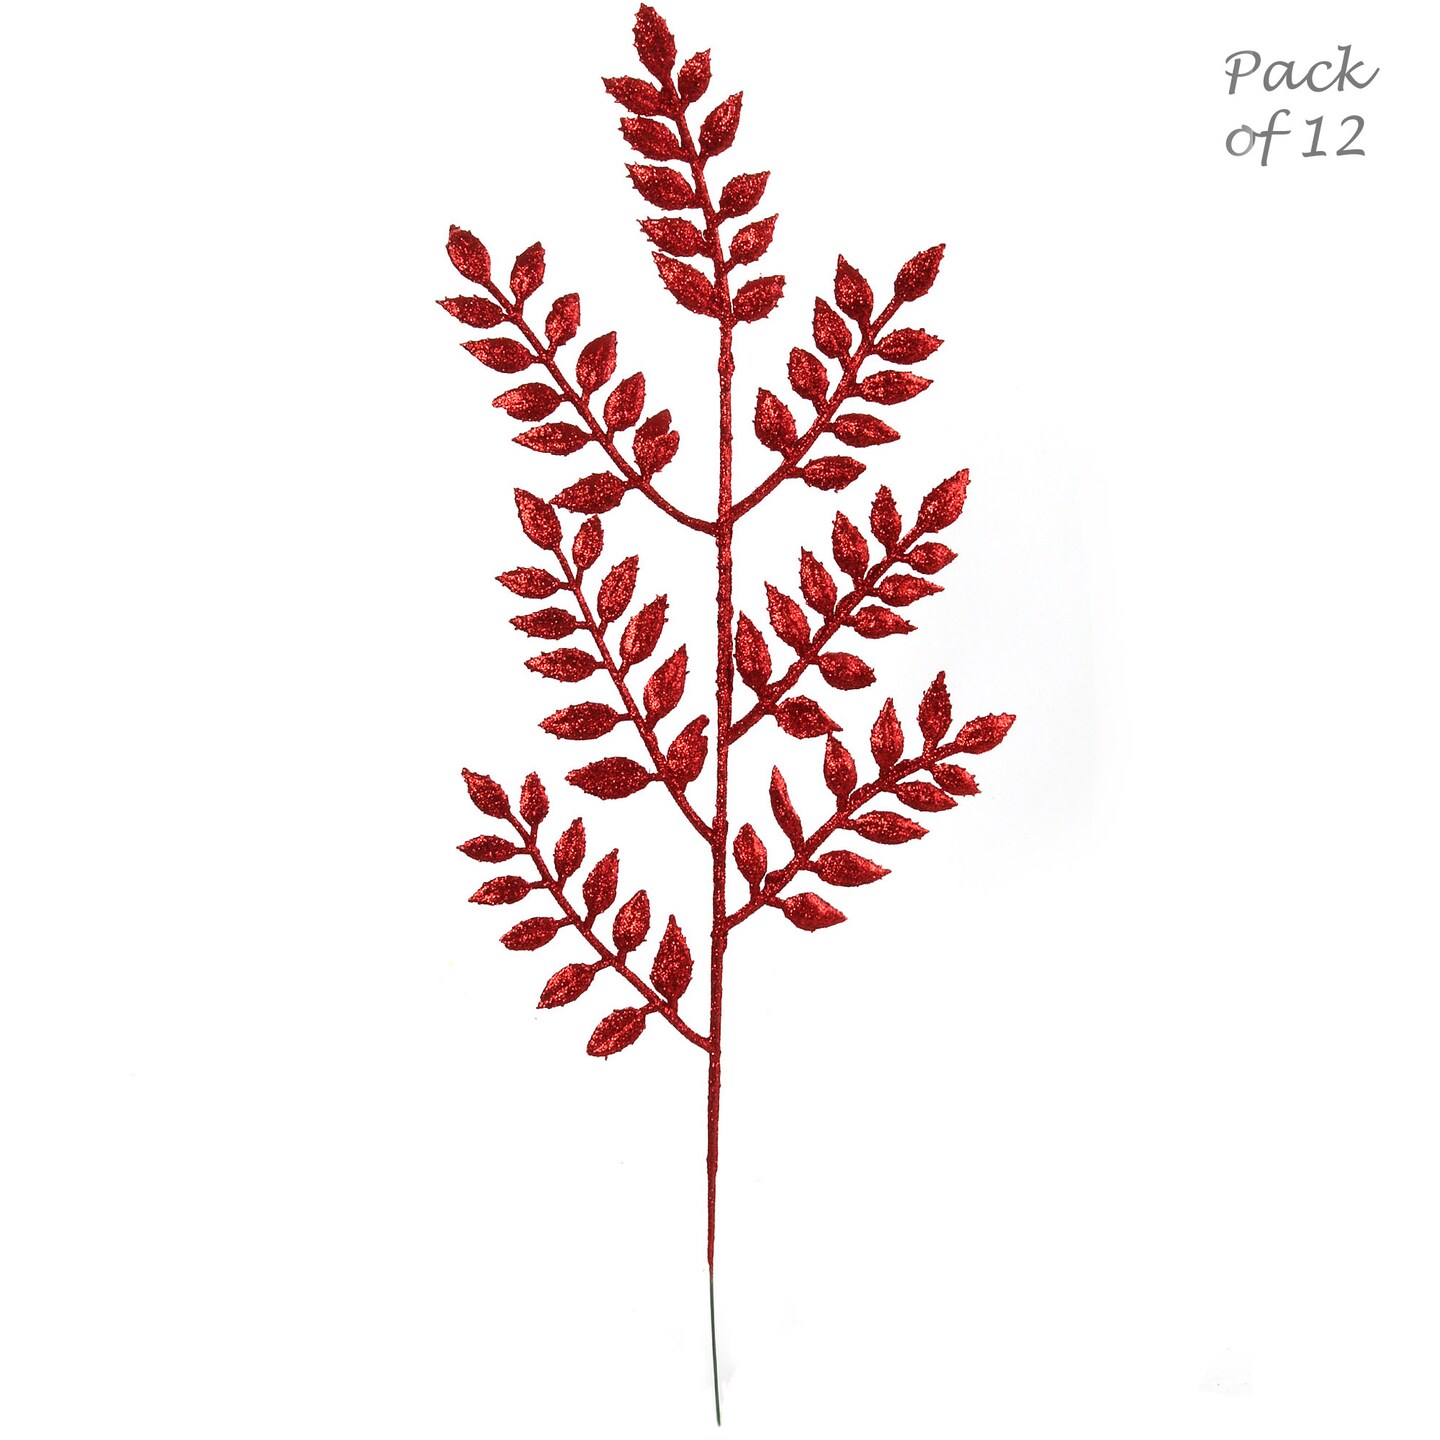 17-Inch Glitter Ash Spray IDZ: Sparkling Seasonal Decor | Elegant Accents for Home and Office | Glittered Ash Branches for Festive and Stylish Displays